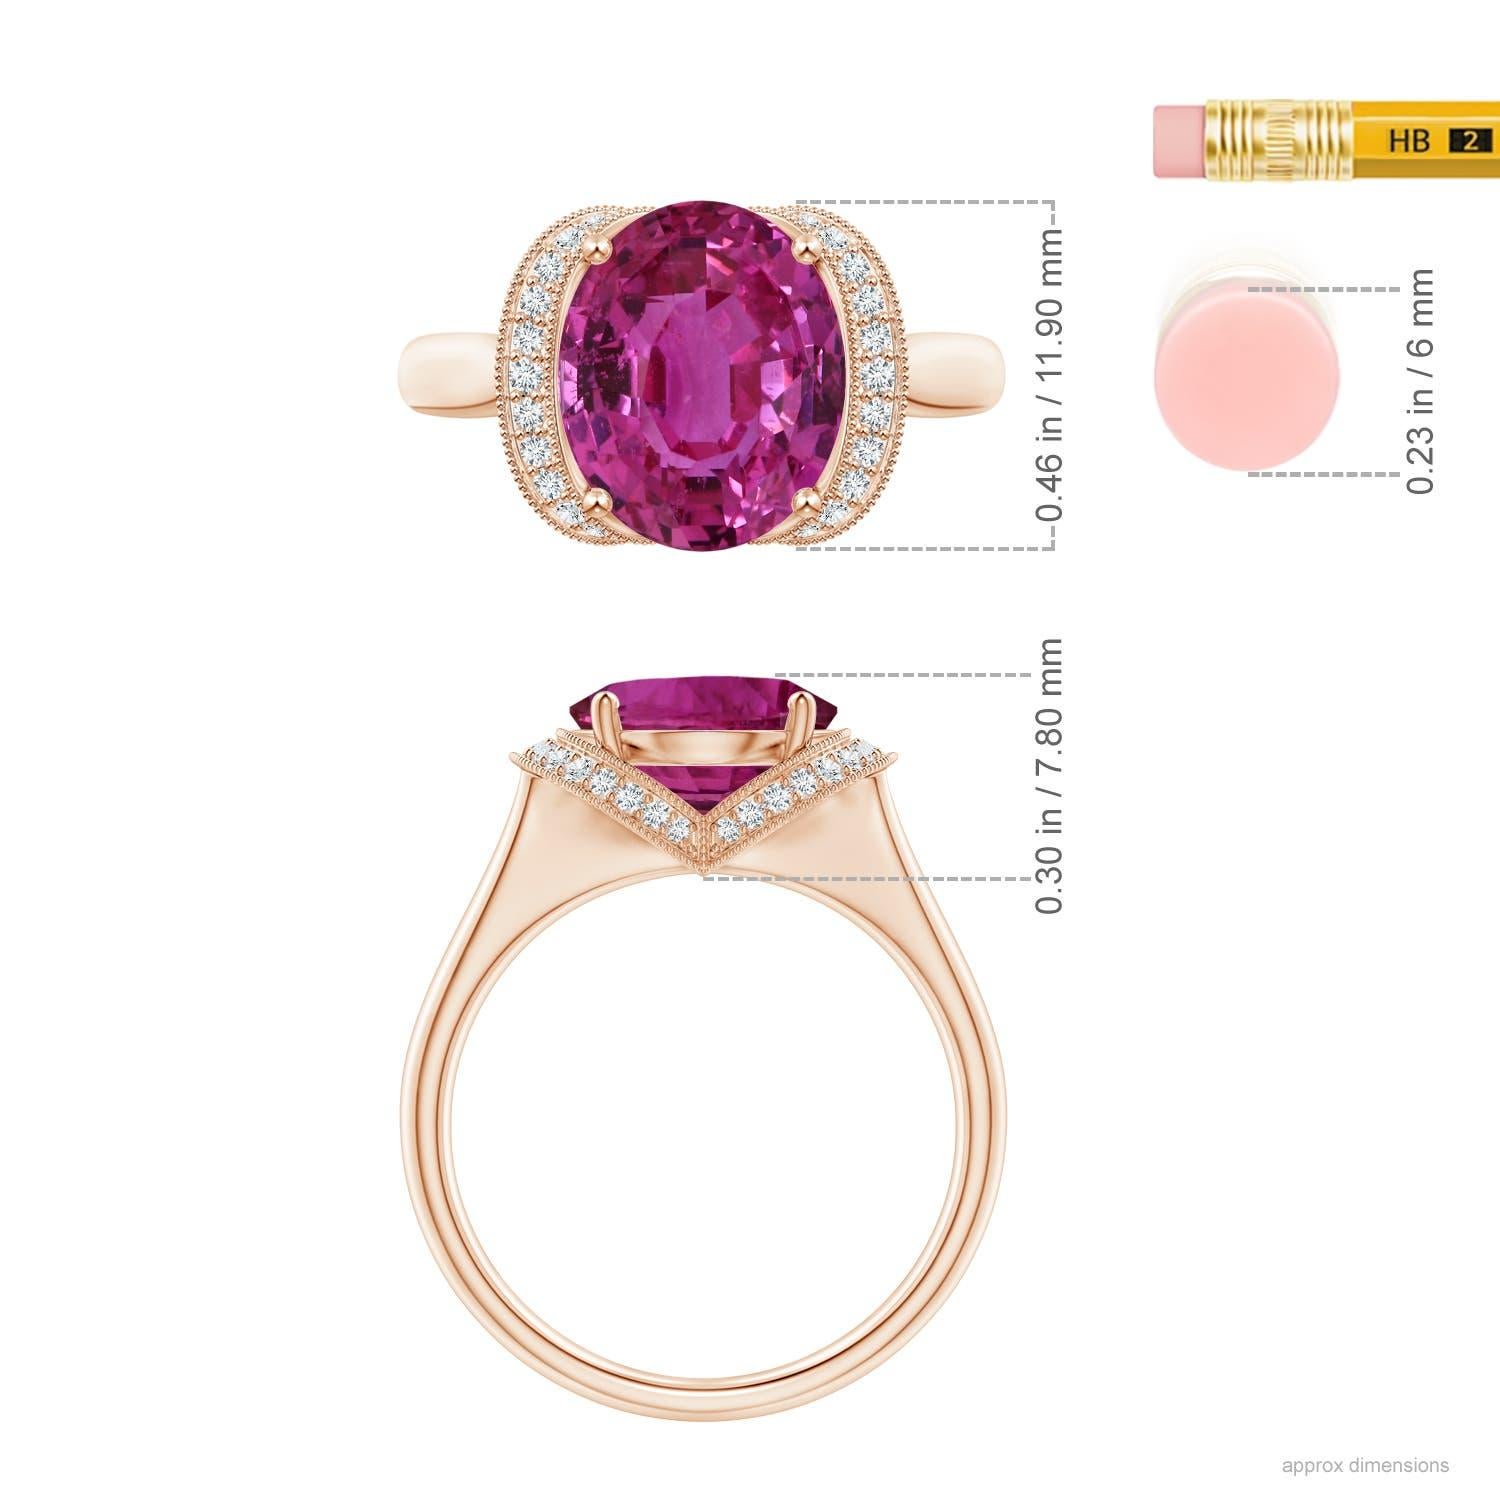 For Sale:  Angara Gia Certified Pink Sapphire Ring in Rose Gold with Diamond Half Halo 4